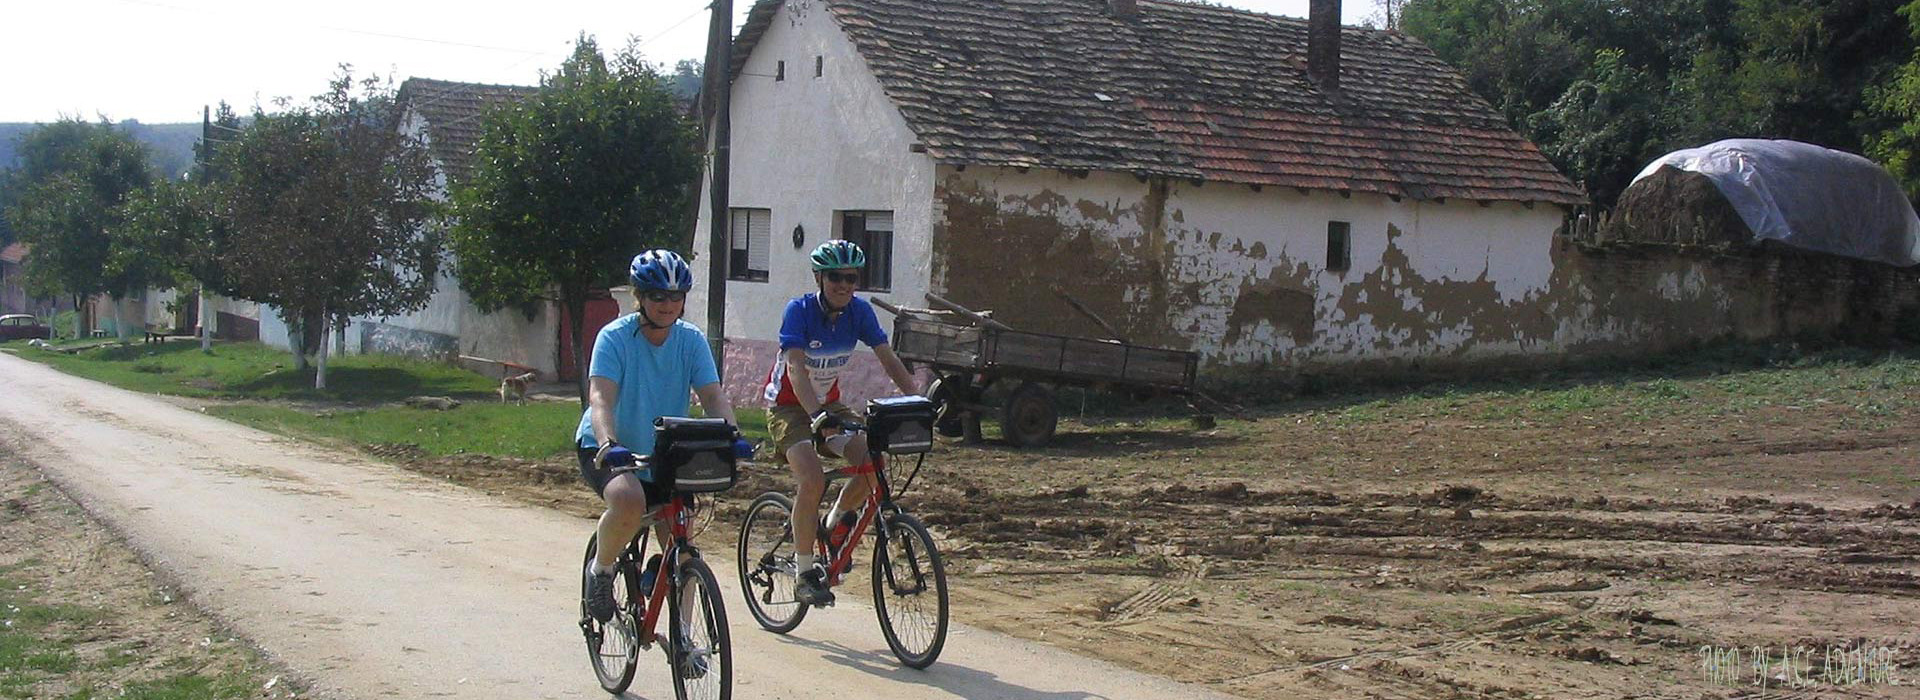 Danube Self-Guided Cycling Holiday - Local villages